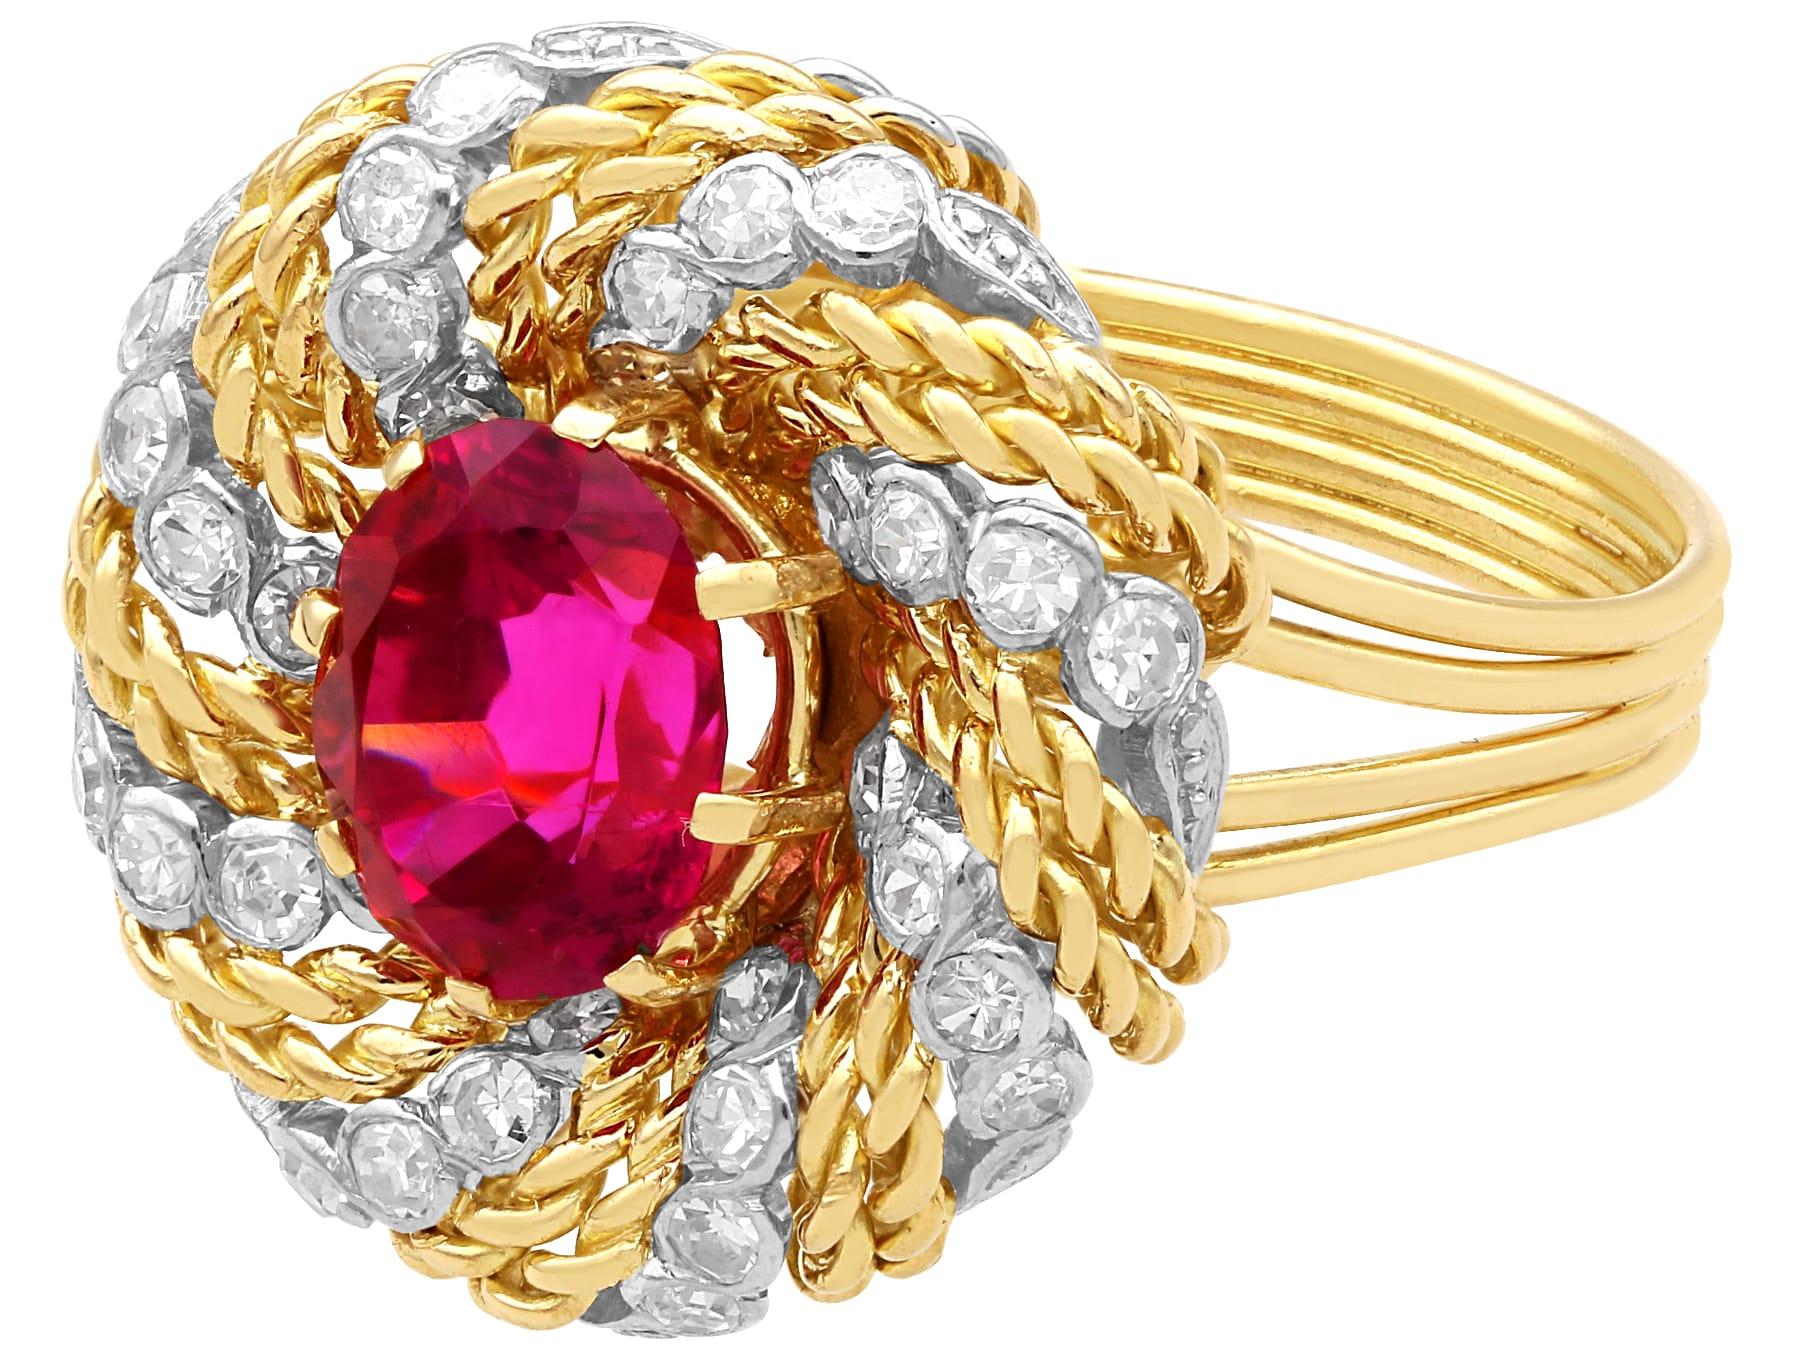 Oval Cut Vintage 3.75 Carat Pink Tourmaline and 0.96 Carat Diamond Yellow Gold Dress Ring For Sale